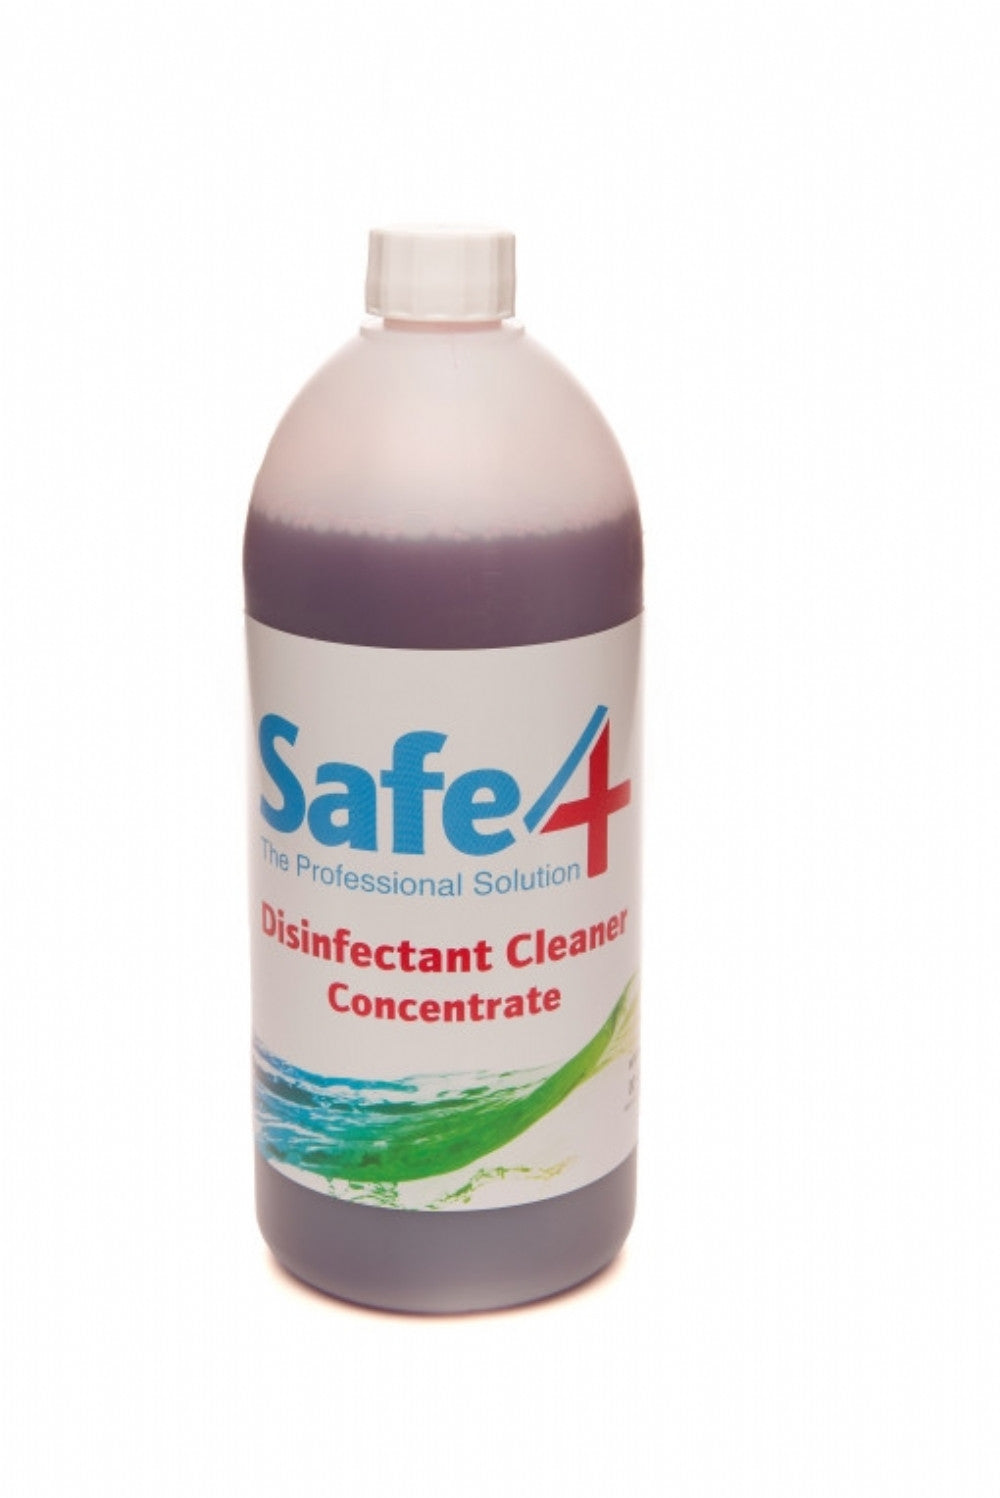 Safe 4 Disinfectant, Concentrated